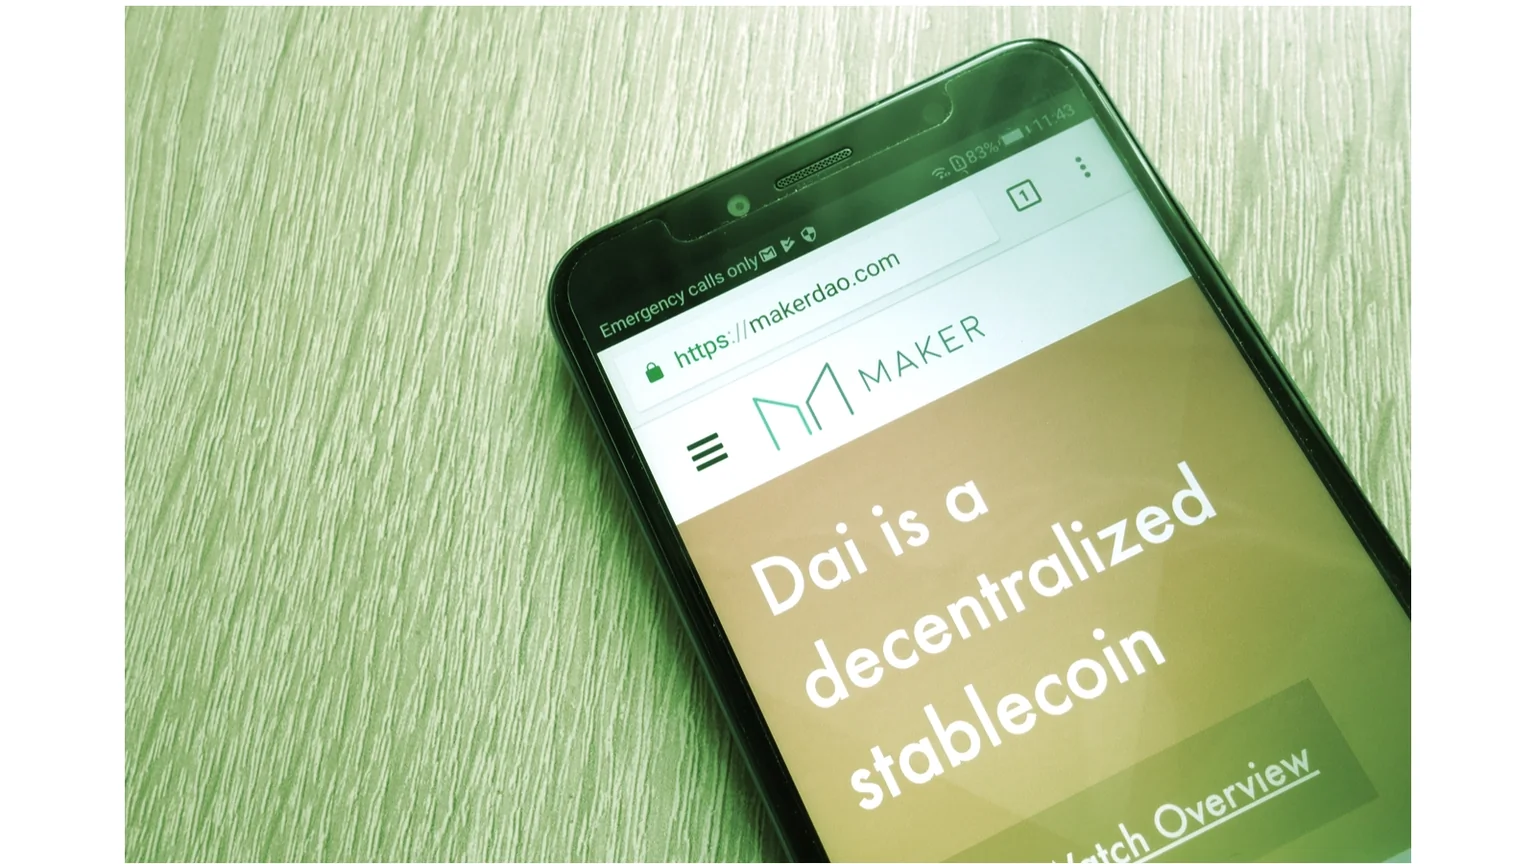 Here's everything you want to know about MakerDAO, but were afraid to ask.